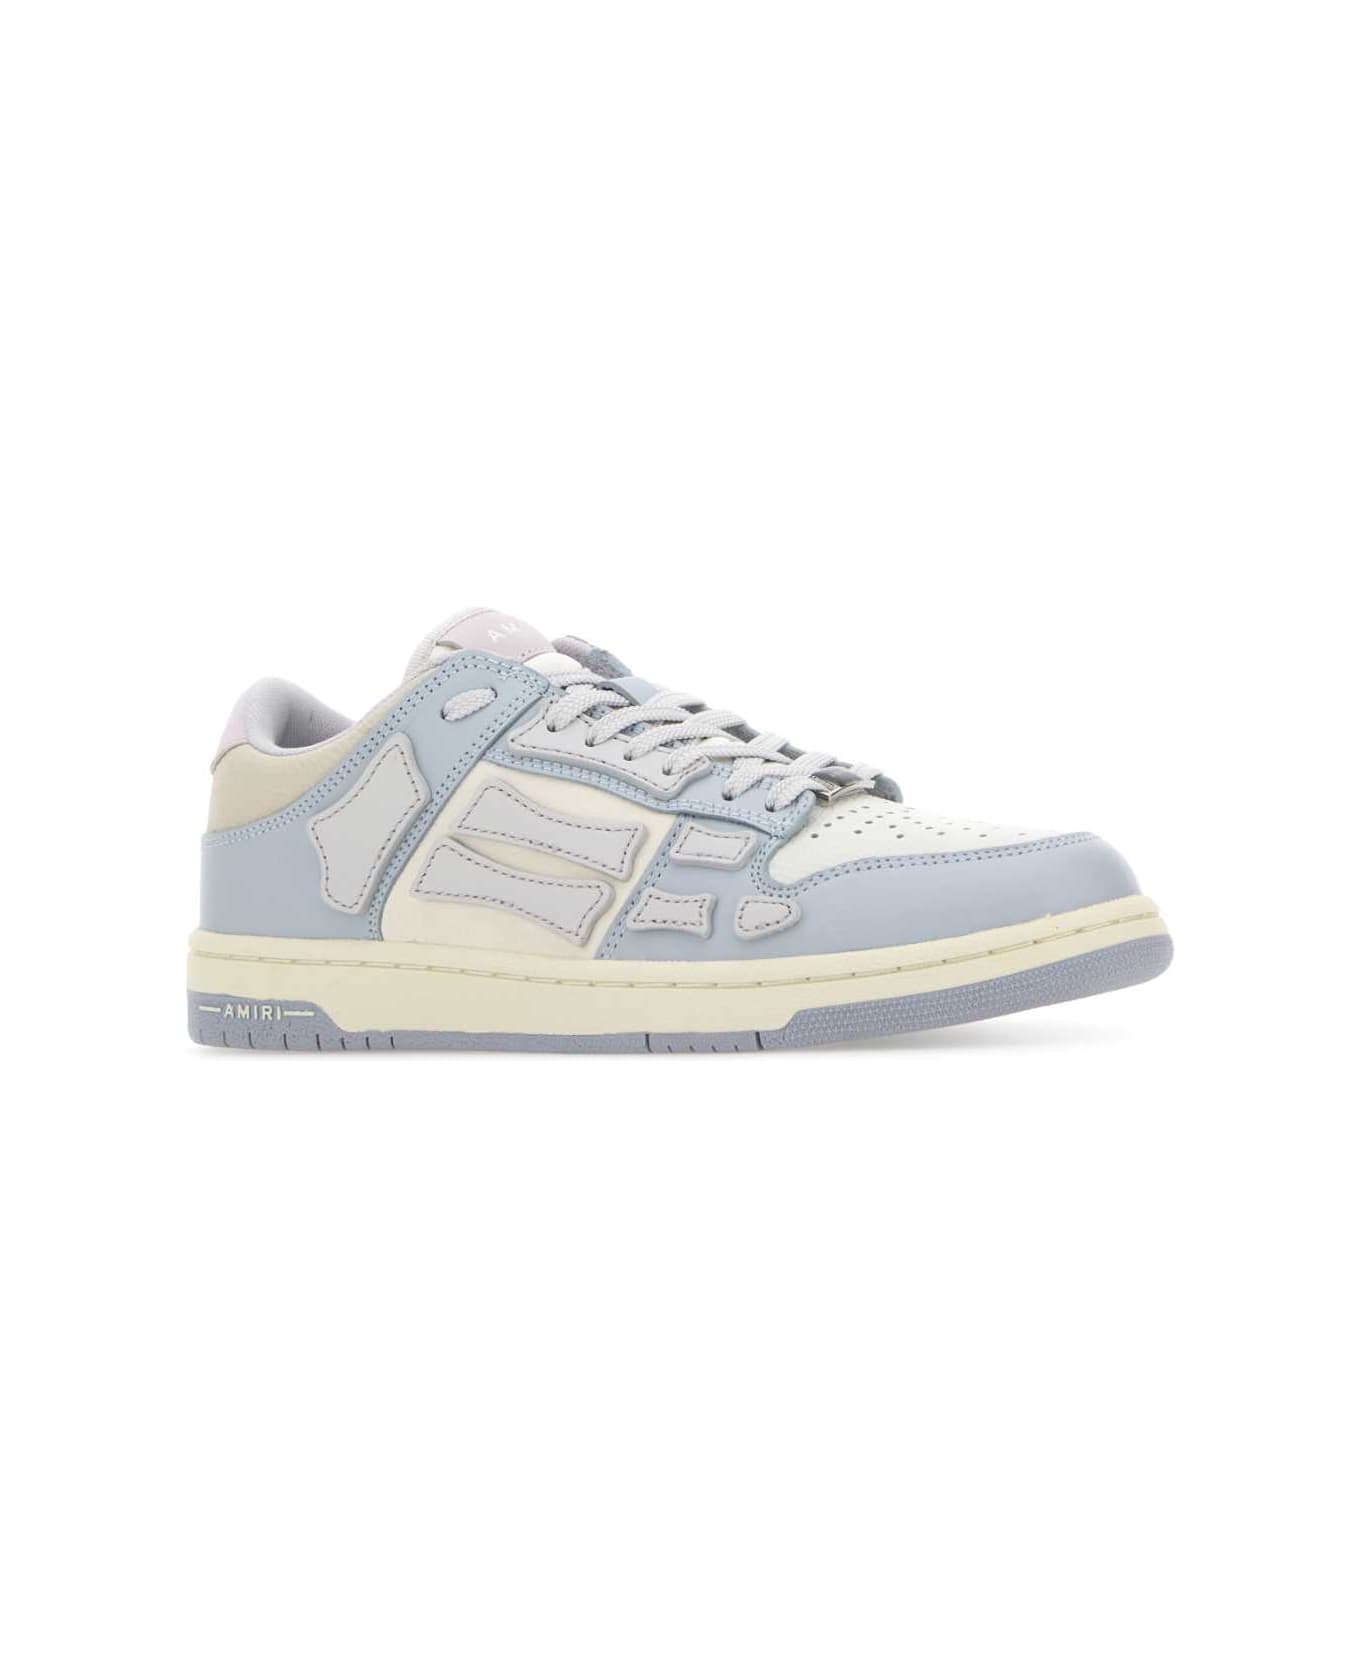 AMIRI Two-tone Leather Skel Sneakers - GREYBLUE